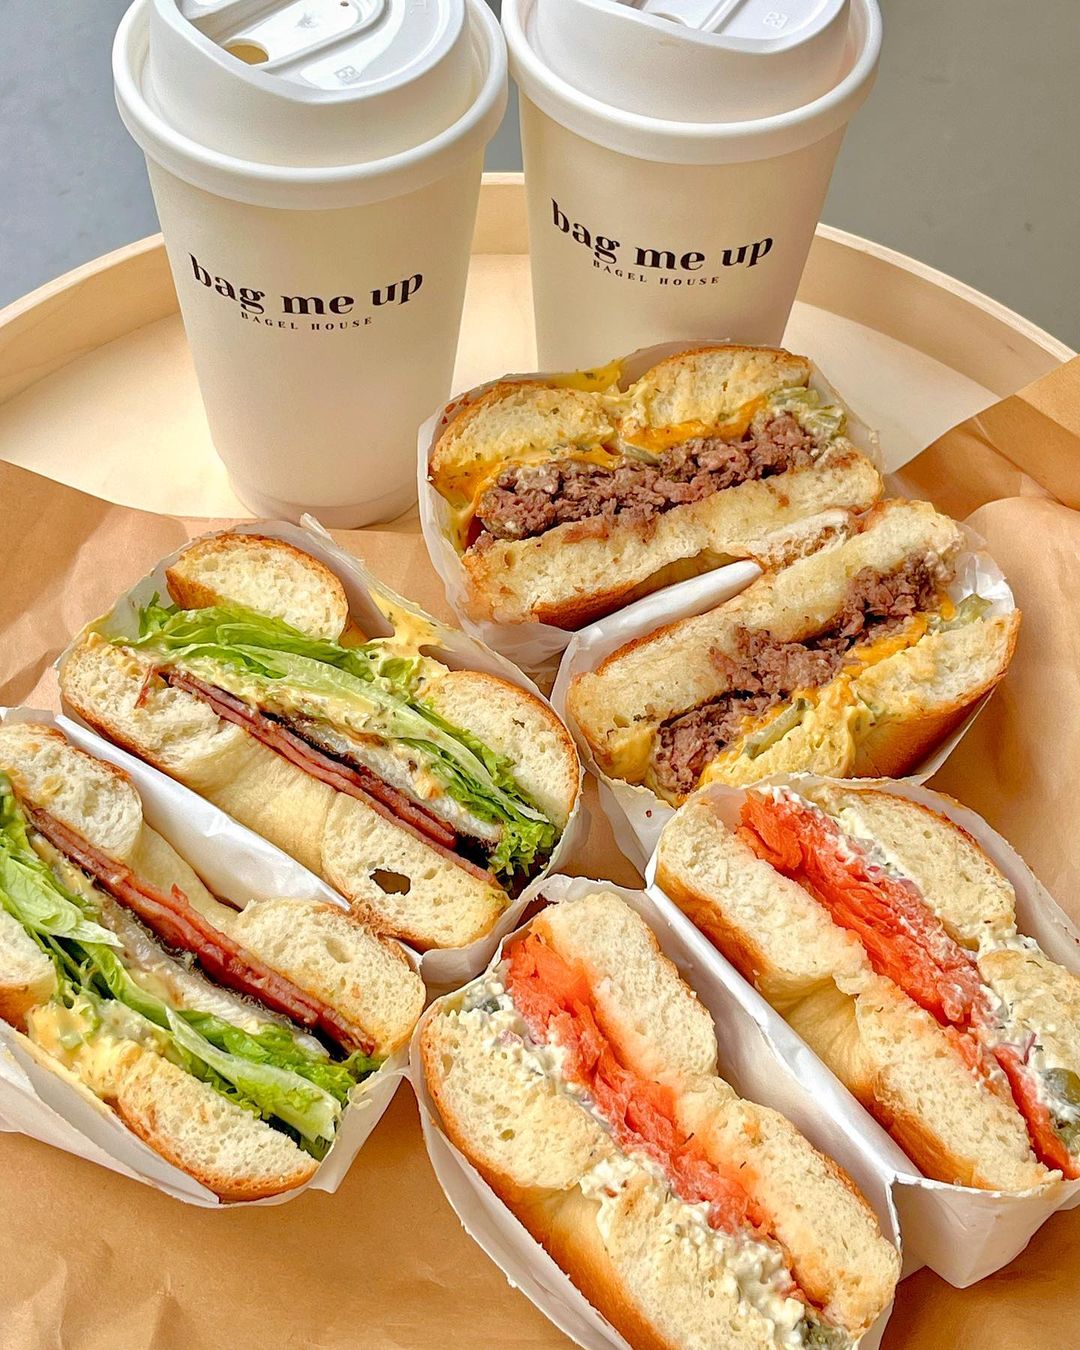 New cafes and restaurants January 2023 - bag me up premium bagels